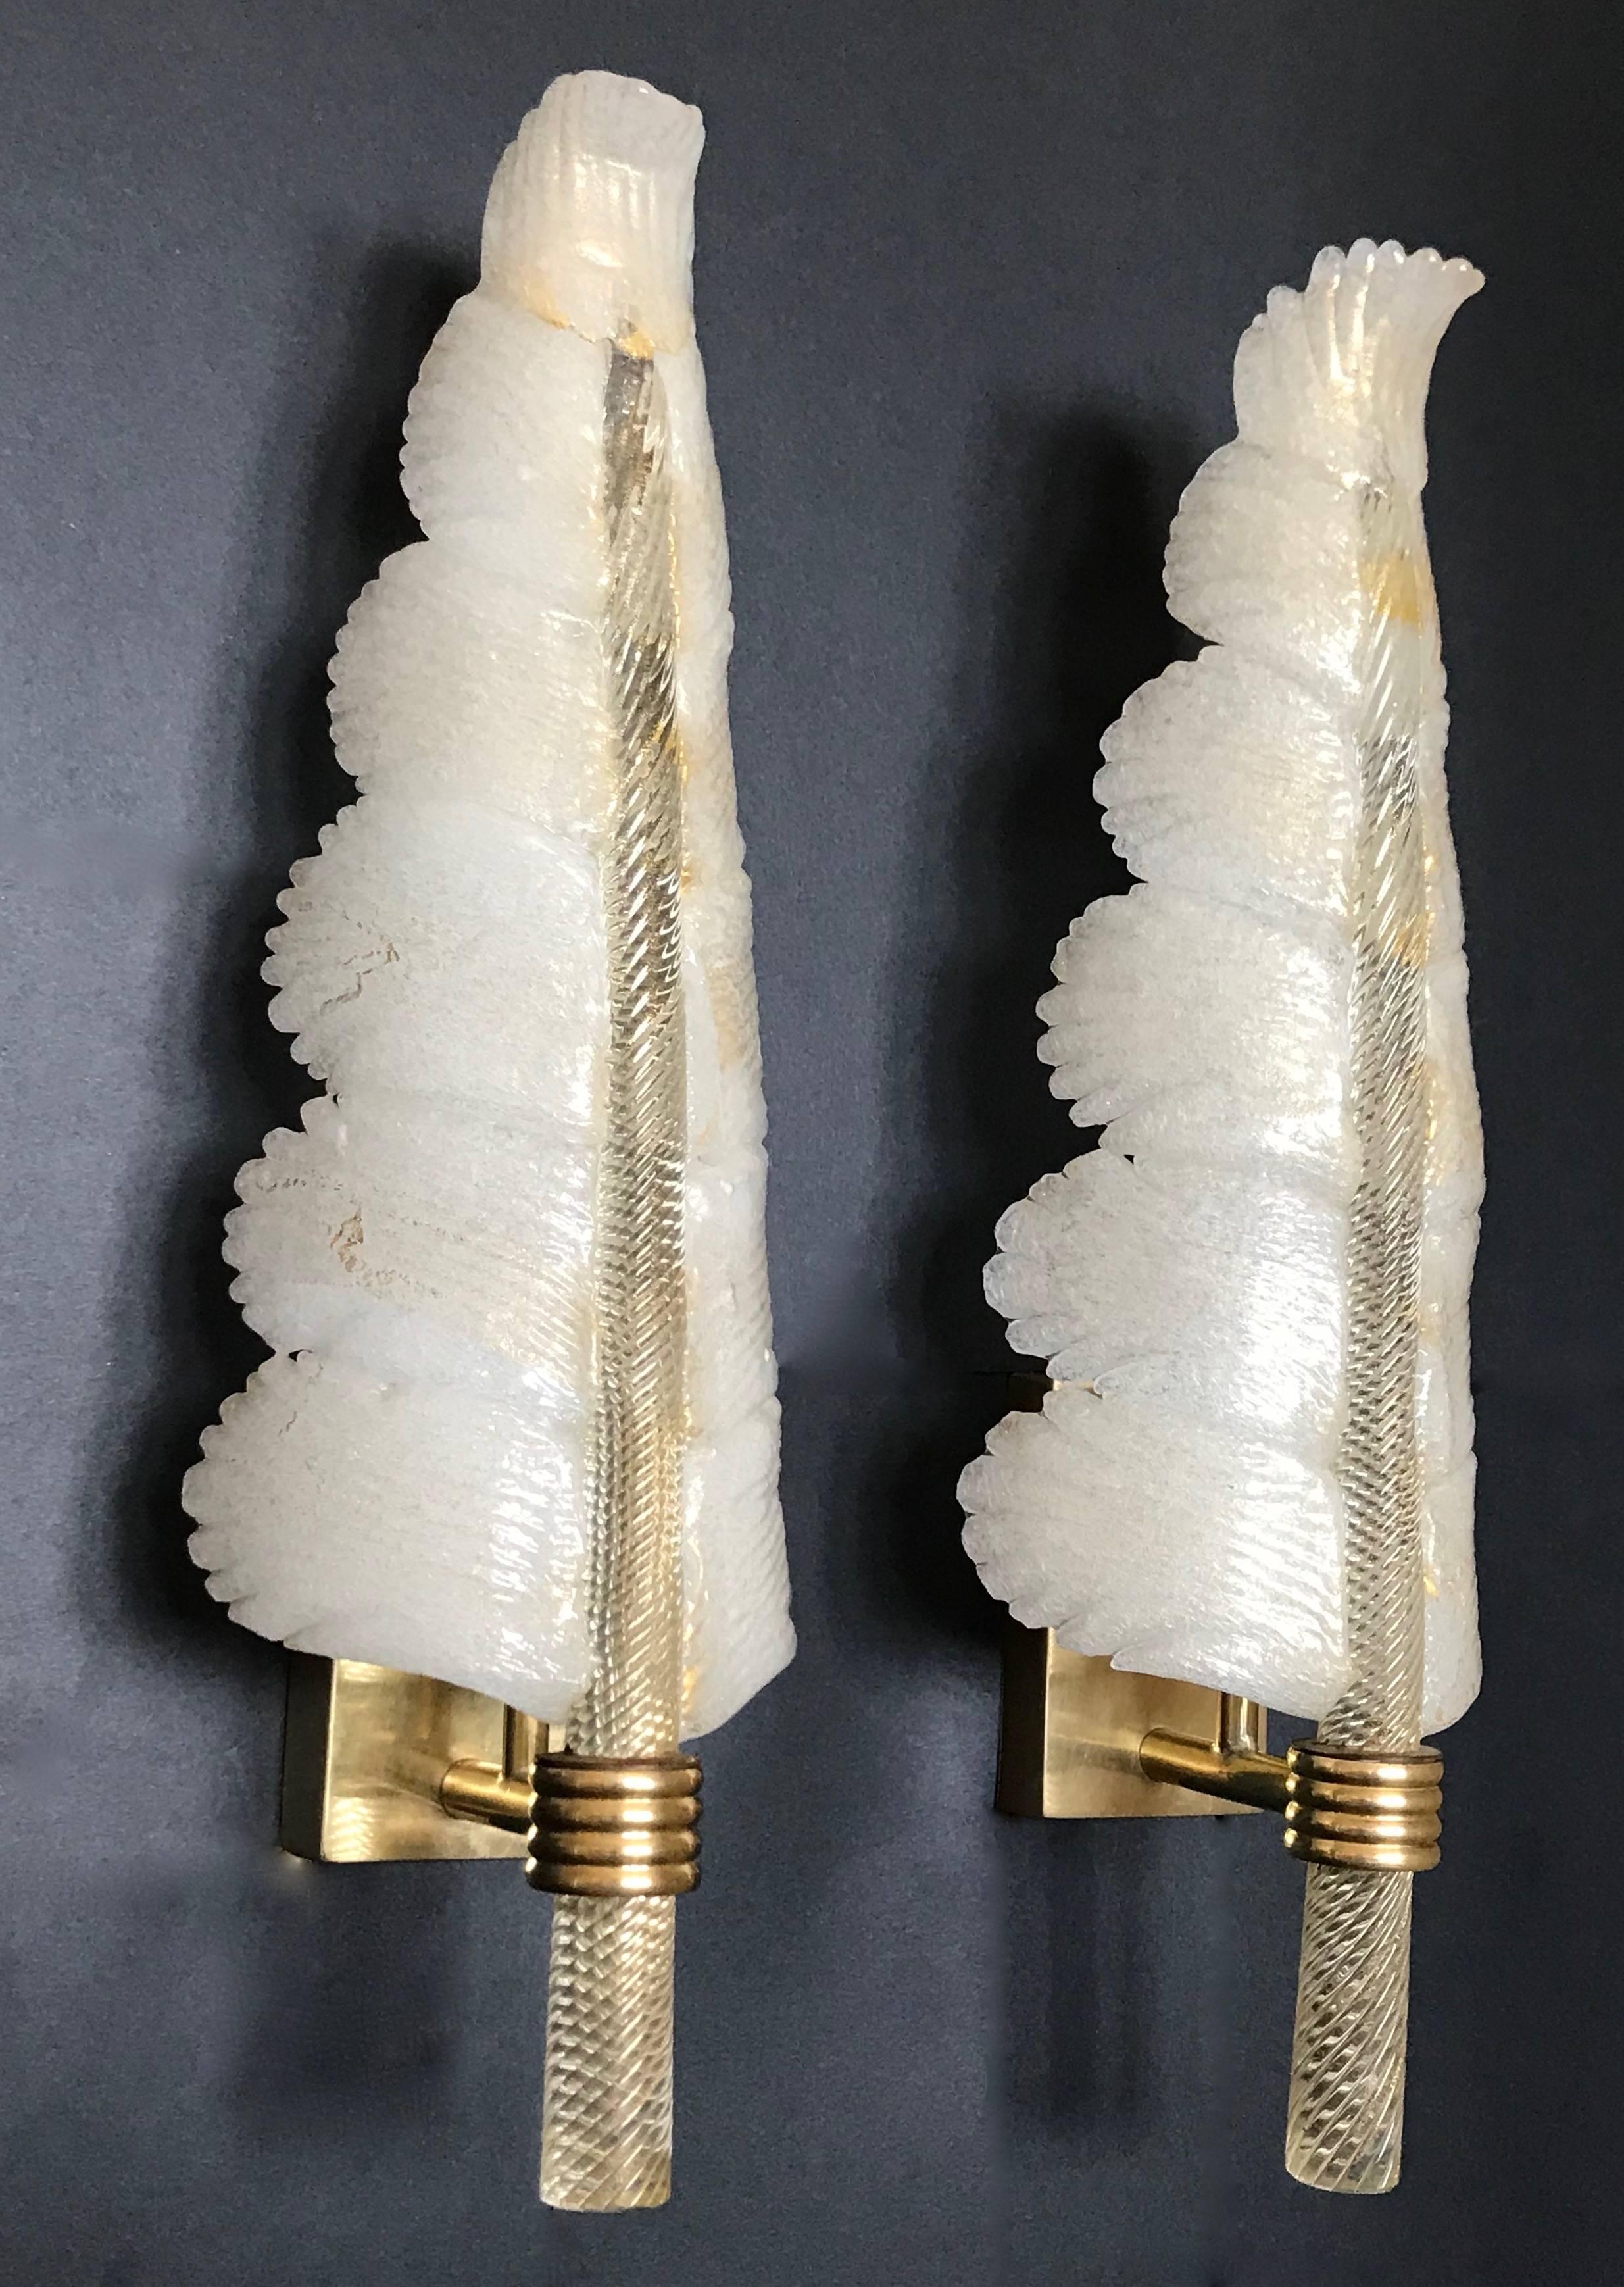 Beautiful set of four Murano Italian glass wall sconces in plume or feather form by Barovier et Toso. Centre stems are thick clear twisted glass infused with gold flecking. Puleguso glass sides (infused with tiny bubbles that create an opaque